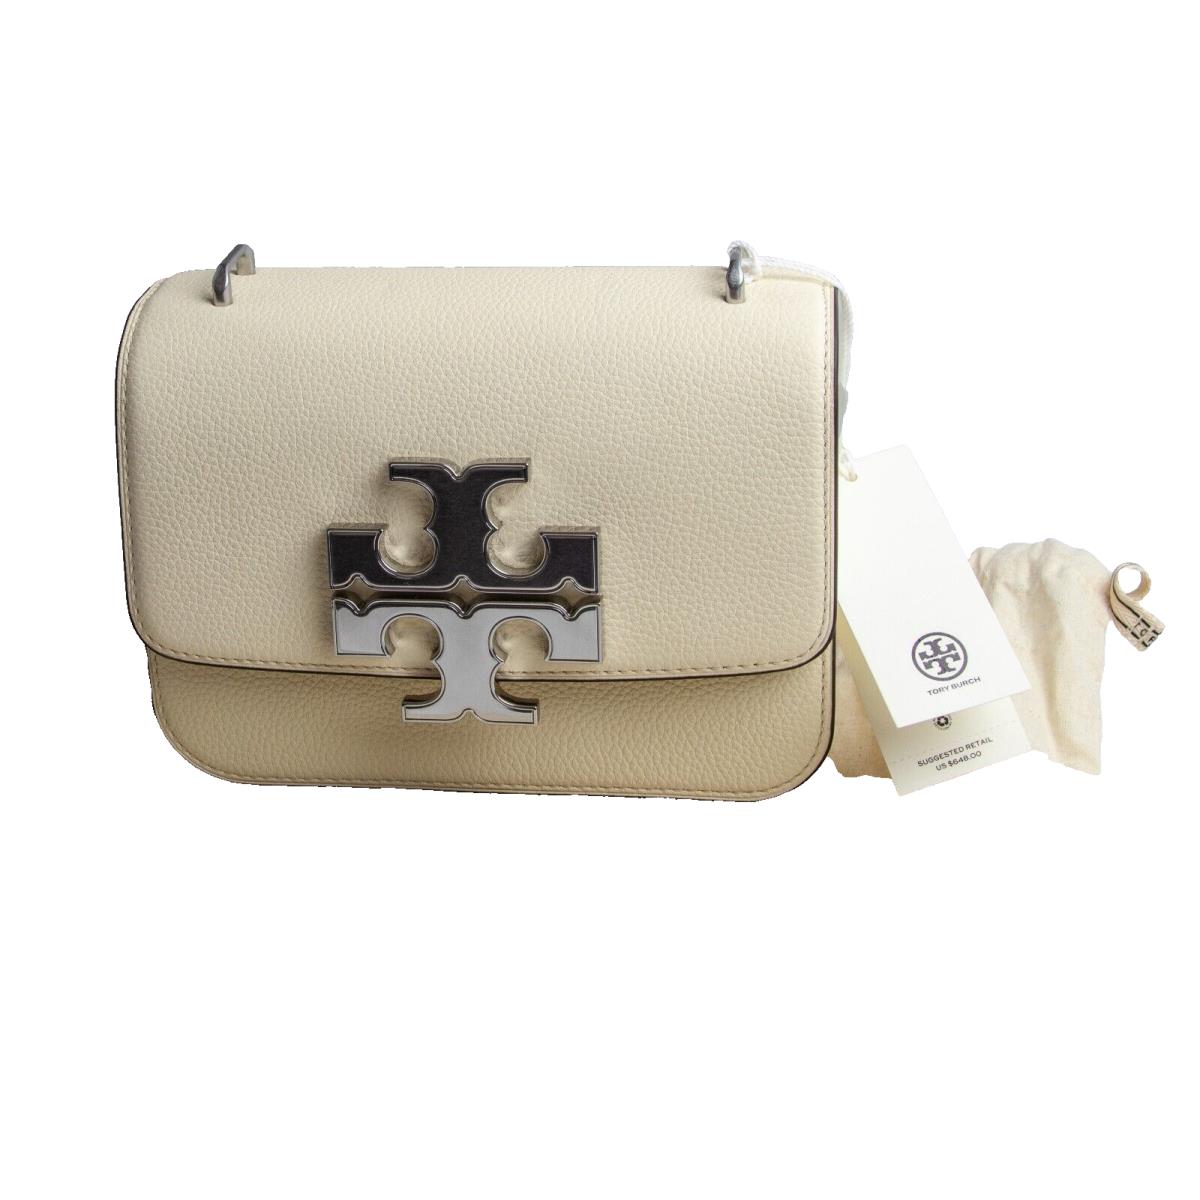 Tory Burch Small Eleanor Leather Convertible Shoulder Bag Zip Pocket Lined